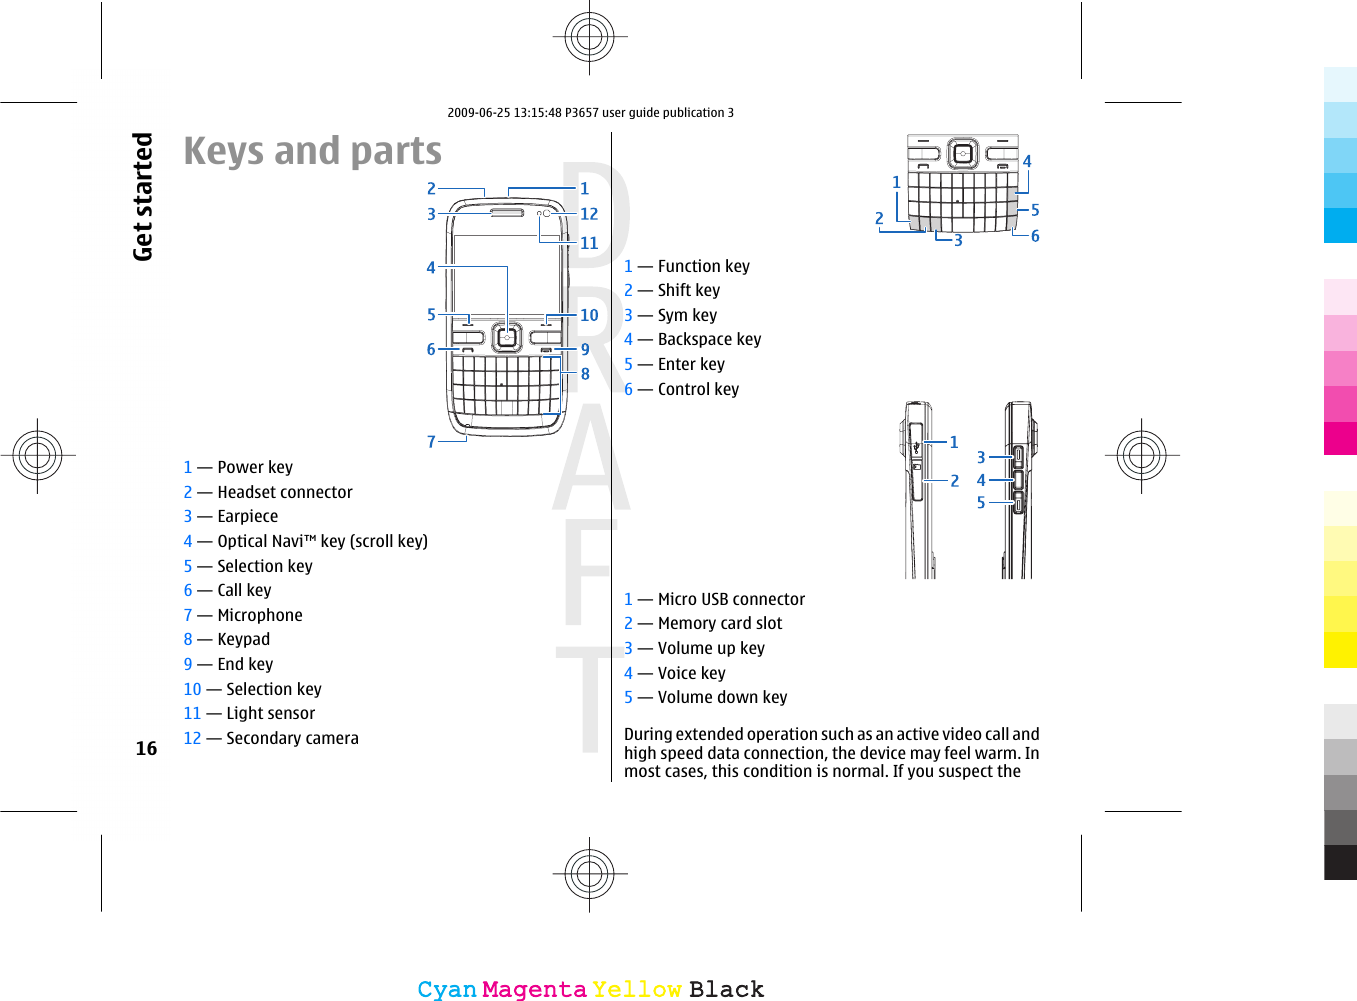 Keys and parts1 — Power key2 — Headset connector3 — Earpiece4 — Optical Navi™ key (scroll key)5 — Selection key6 — Call key7 — Microphone8 — Keypad9 — End key10 — Selection key11 — Light sensor12 — Secondary camera1 — Function key2 — Shift key3 — Sym key4 — Backspace key5 — Enter key6 — Control key1 — Micro USB connector2 — Memory card slot3 — Volume up key4 — Voice key5 — Volume down keyDuring extended operation such as an active video call andhigh speed data connection, the device may feel warm. Inmost cases, this condition is normal. If you suspect the16Get startedCyanCyanMagentaMagentaYellowYellowBlackBlack2009-06-25 13:15:48 P3657 user guide publication 3